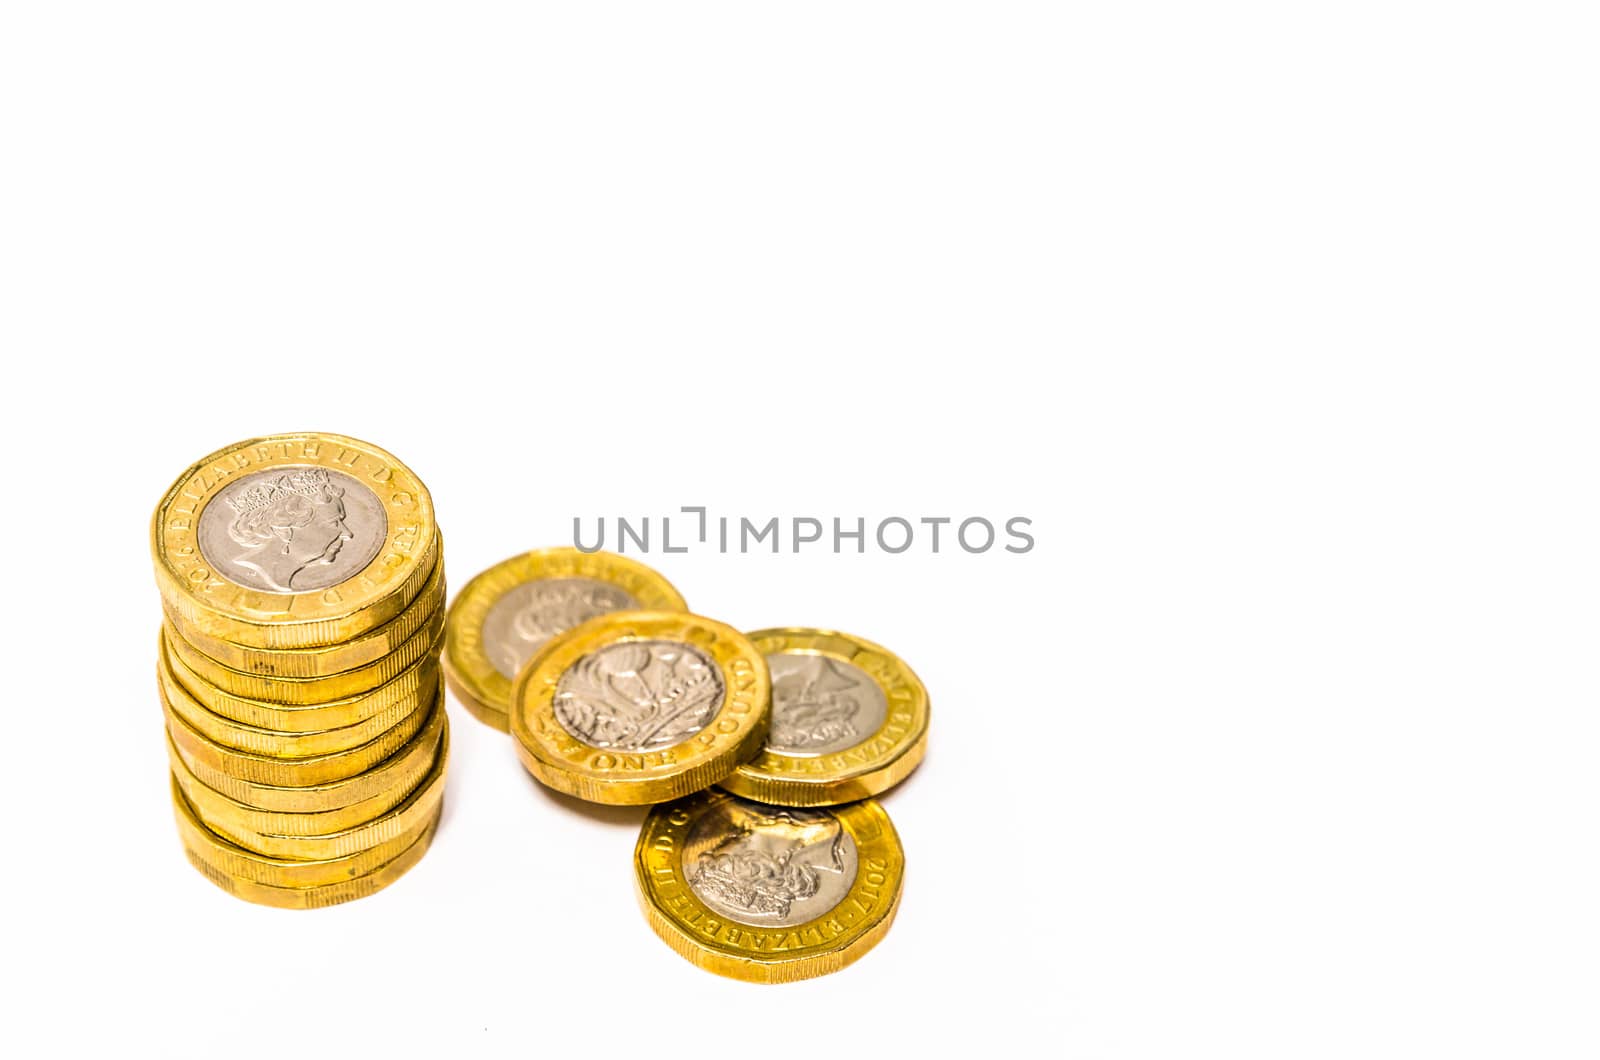 Shiny new one pound coins distributed on a white background